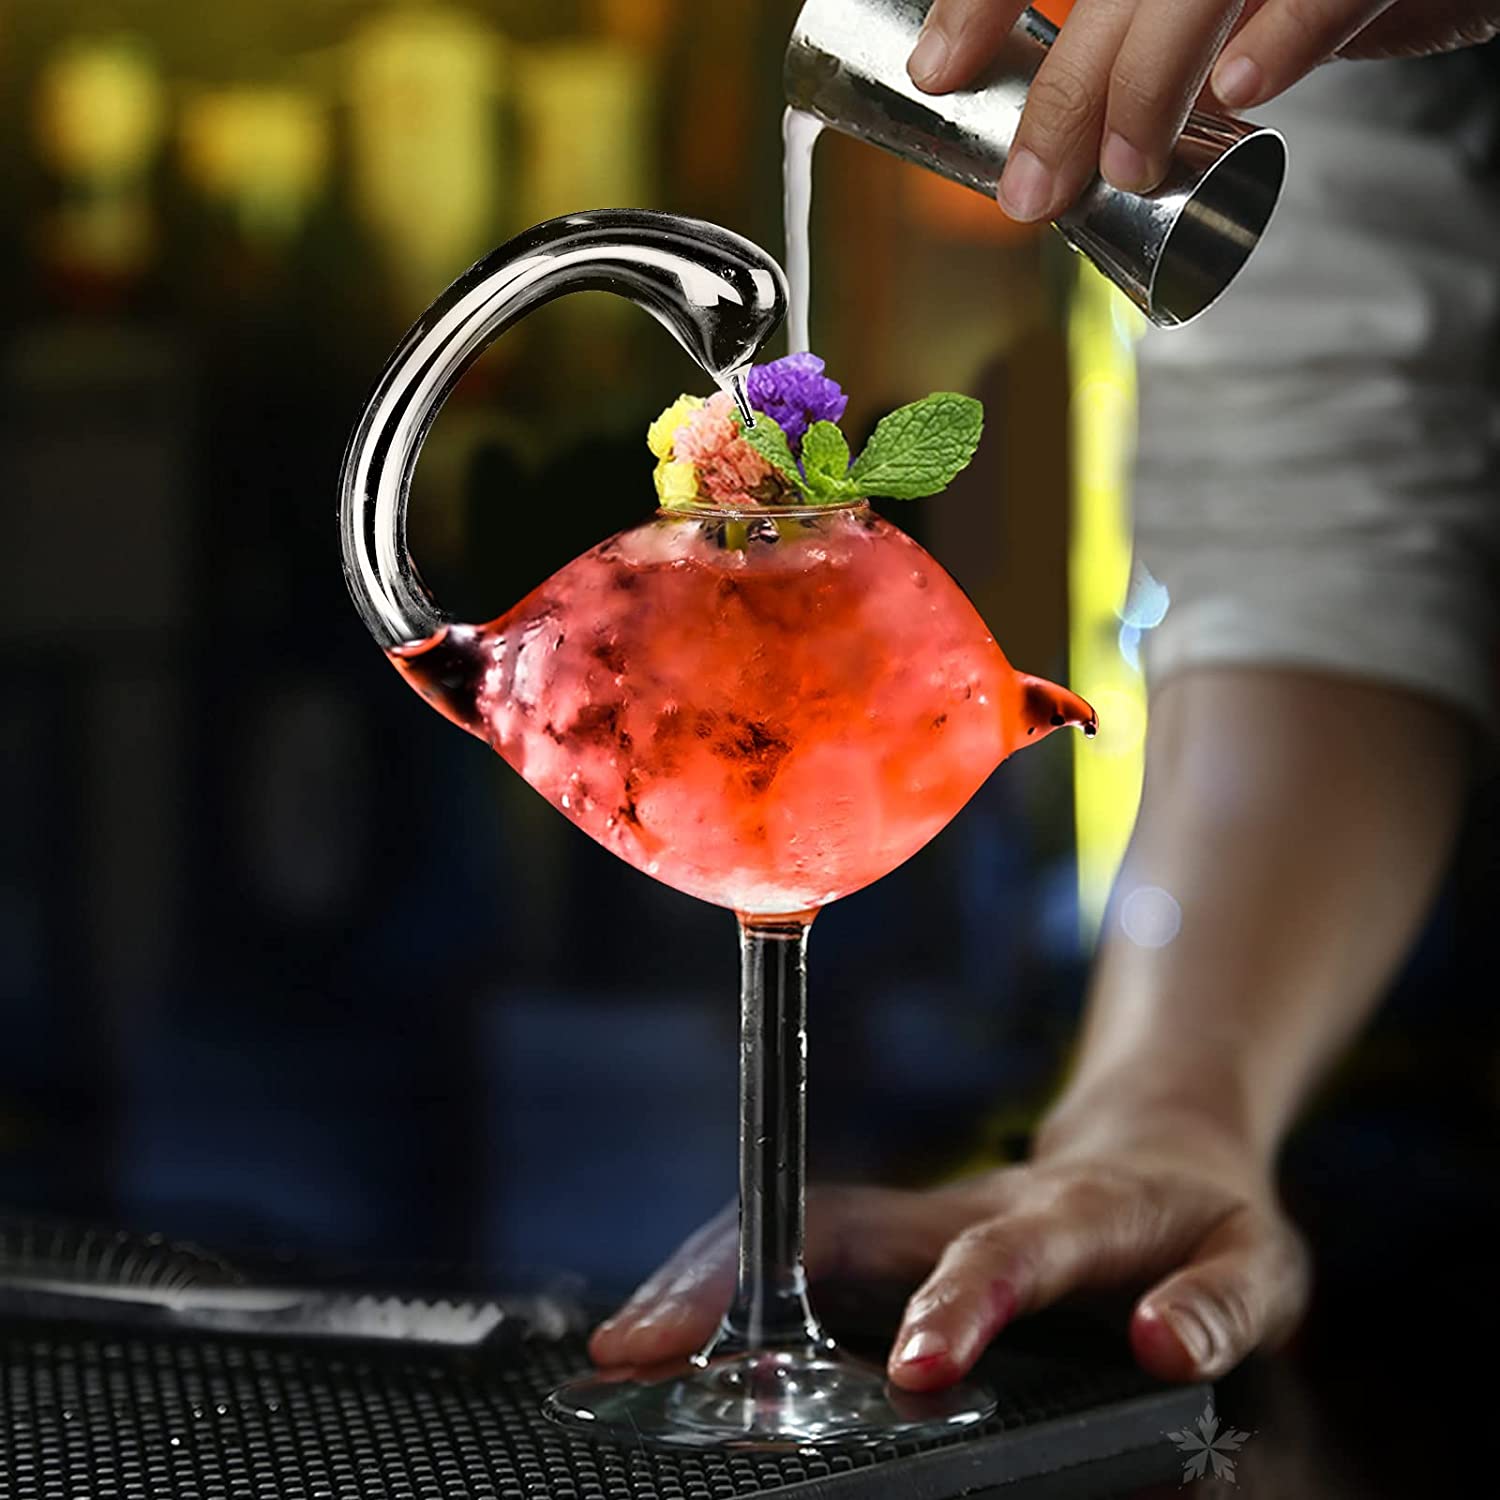 A hand is pouring liquid from a shot glass into a swan shaped cocktail glass. The glass is filled with a red drink with a mint and floral garnish.